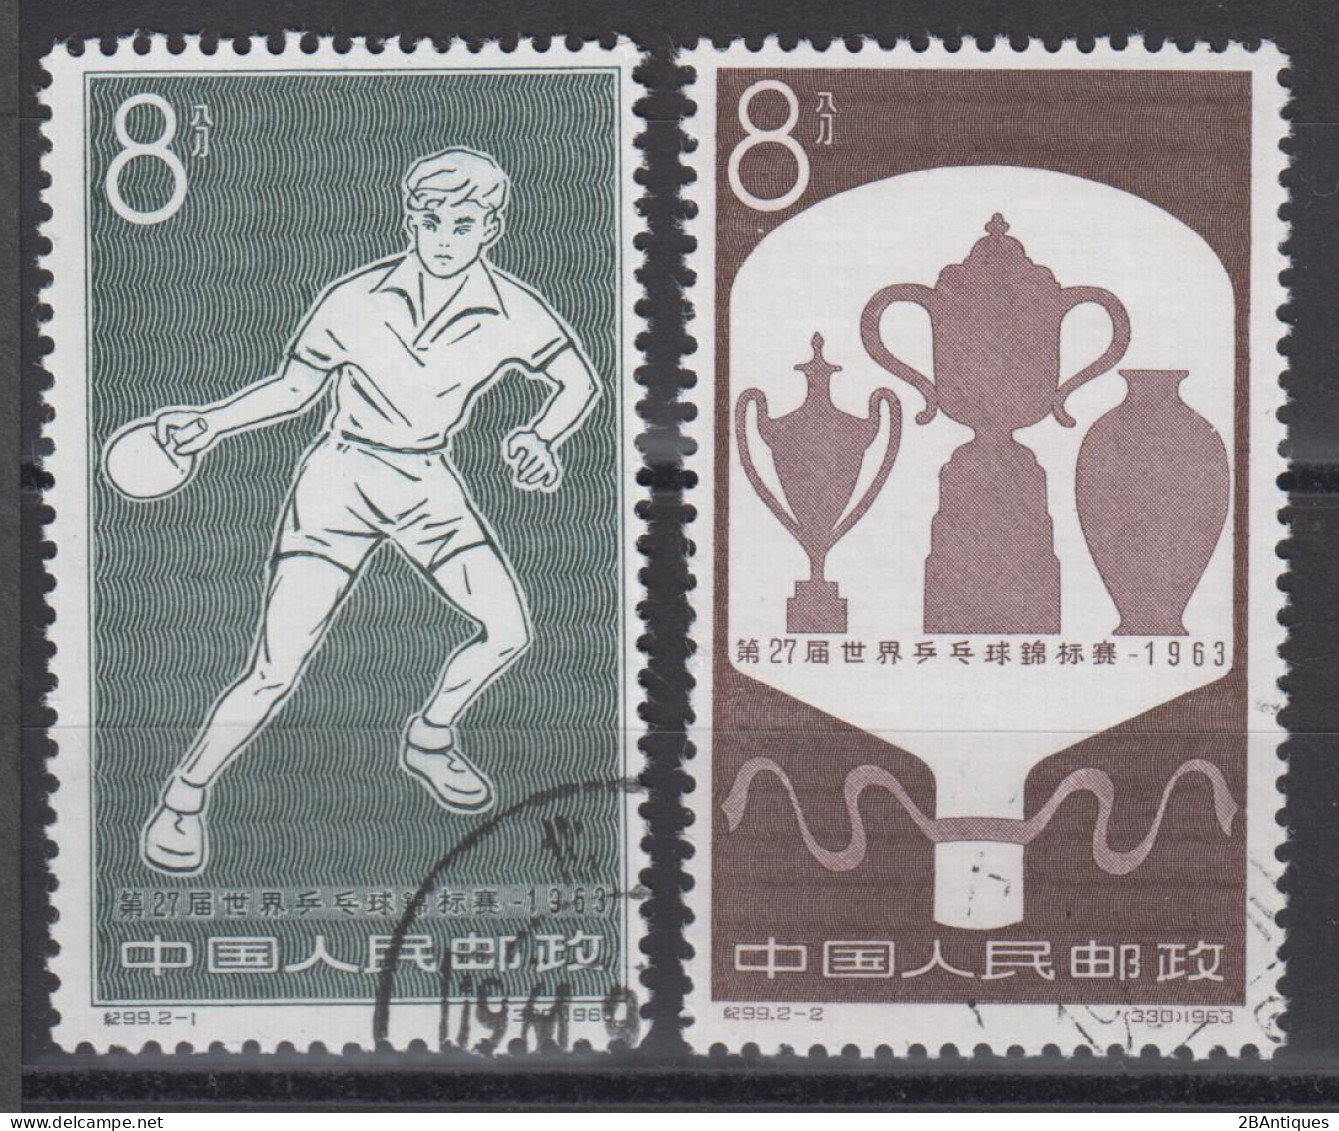 PR CHINA 1963 - The 27th World Table-Tennis Championships CTO OG XF - Used Stamps